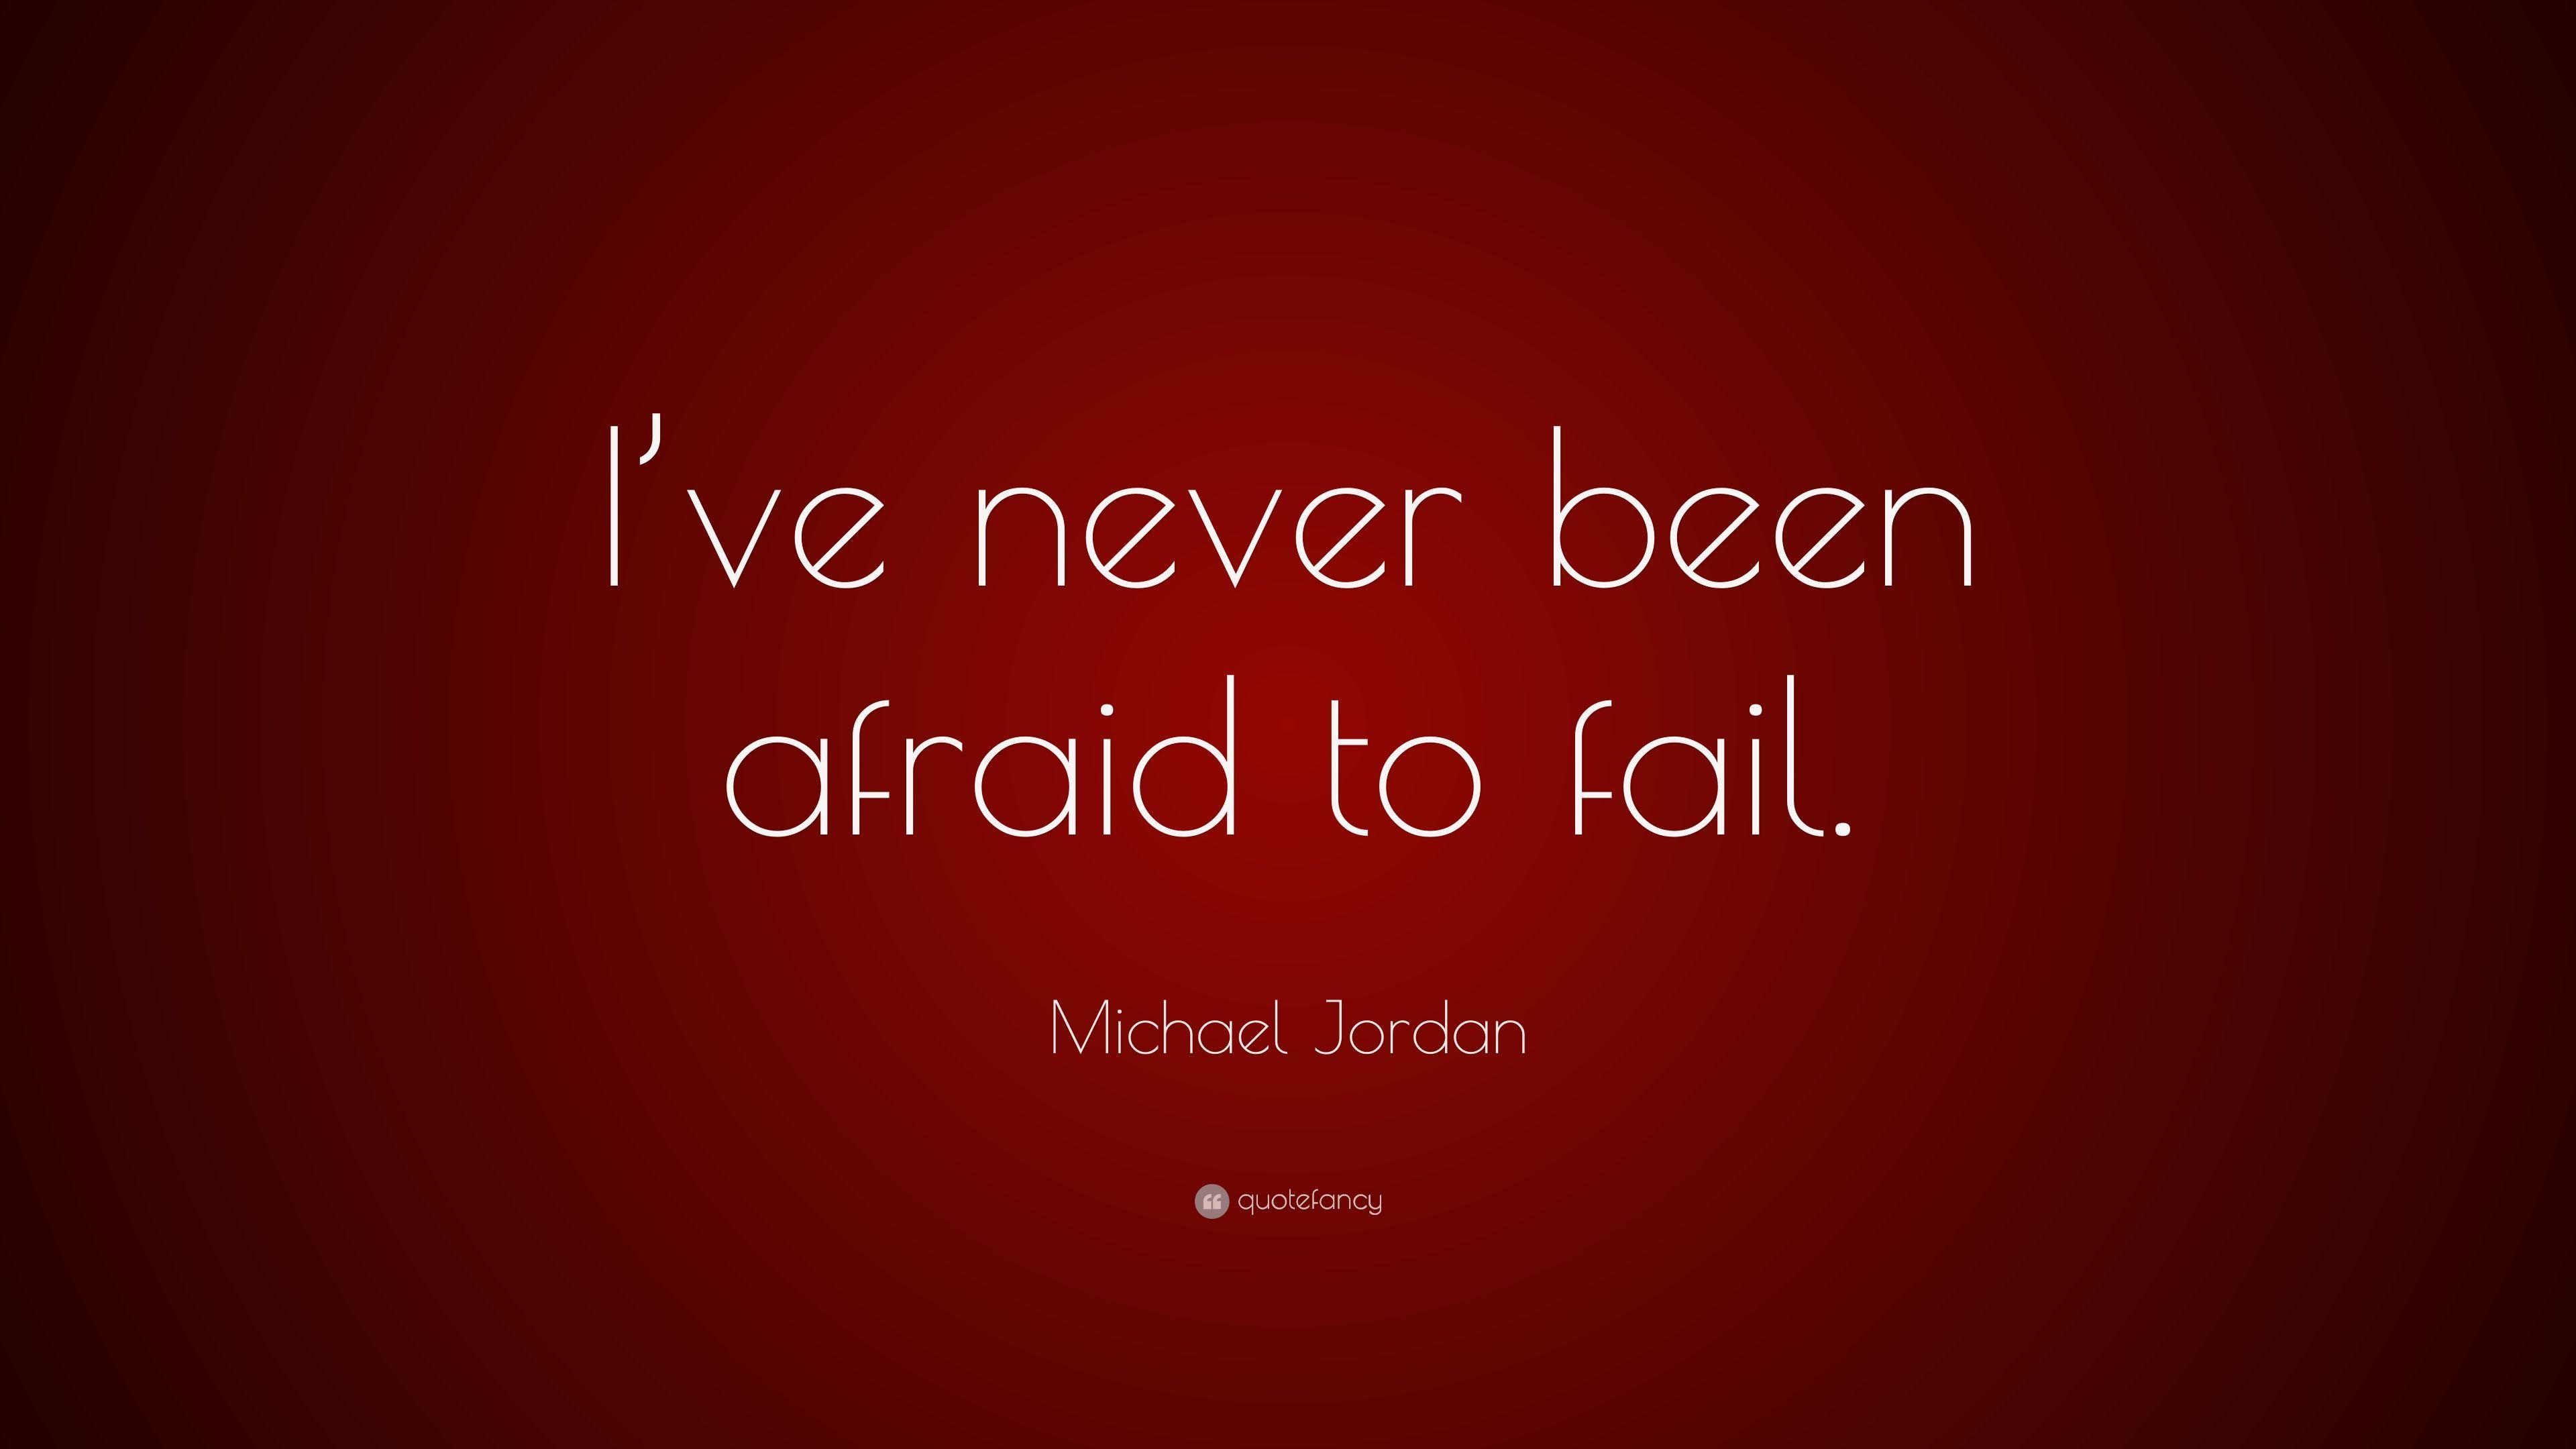 Michael Jordan Quote: “I've never been afraid to fail.” 25